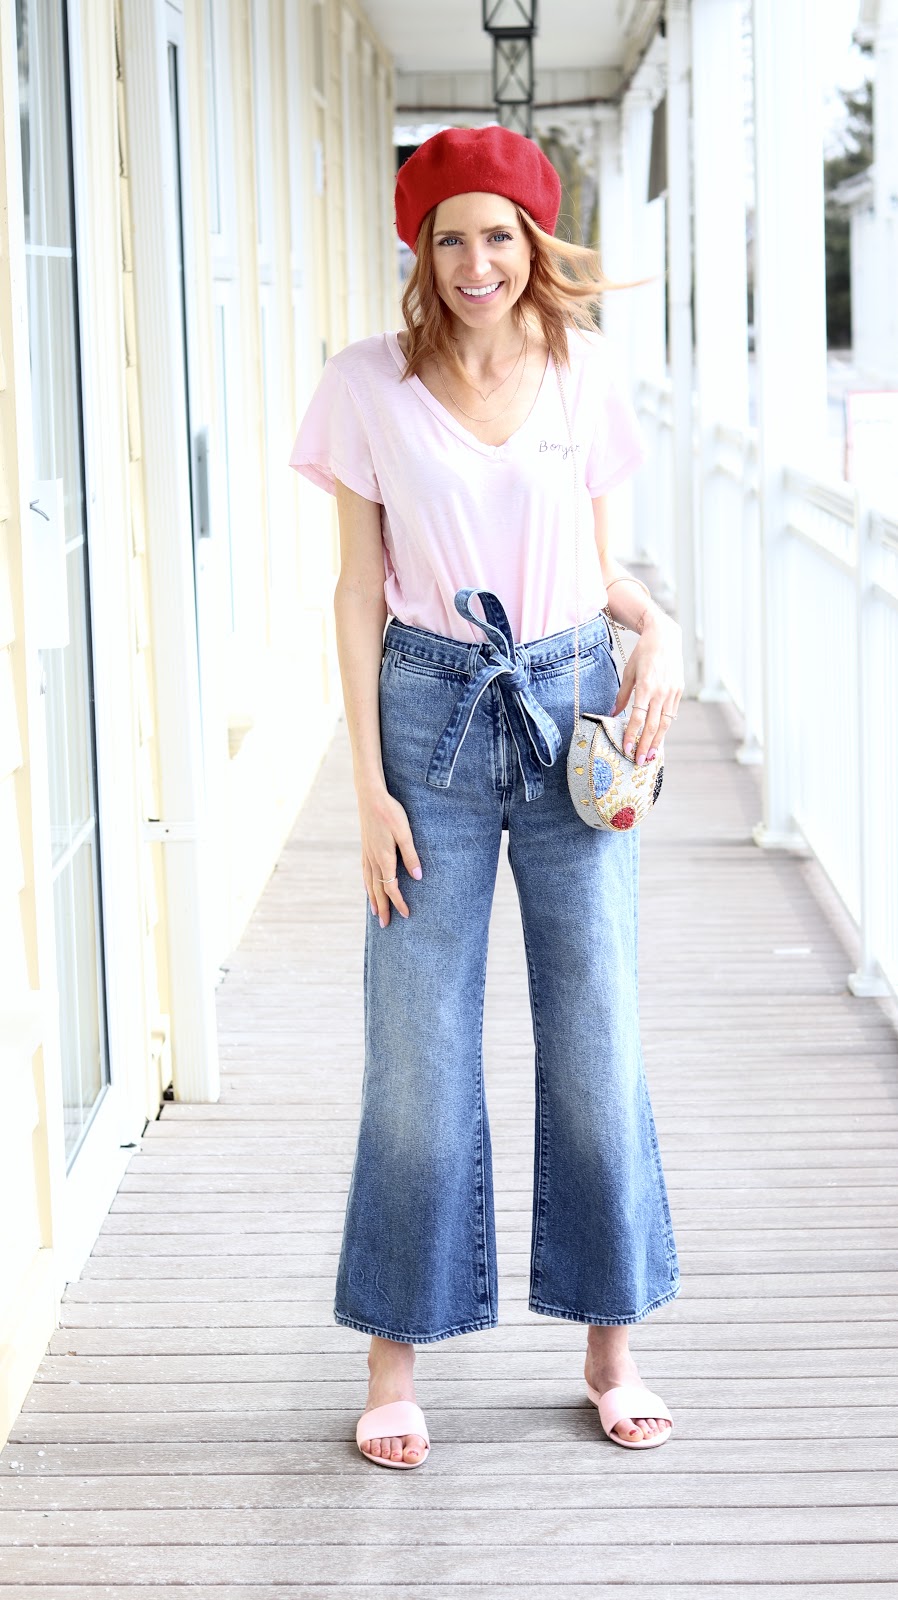 Wide High Waist Jeans H&M, Spring Denim Trends 2018, Pastels & Pastries, Red Beret, Boujour tee shirt Sundry, Soukh bag, spring style